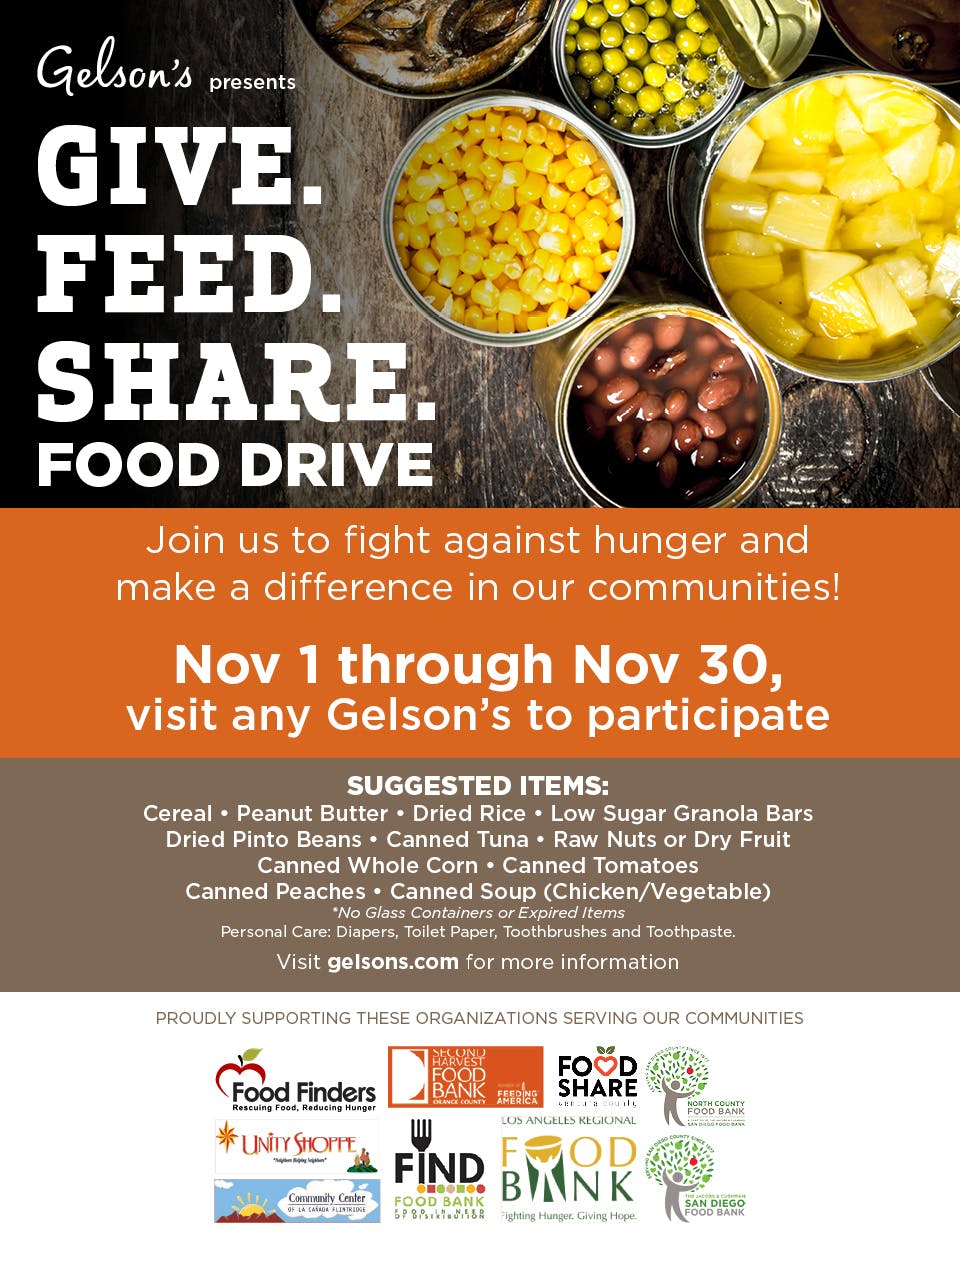 Gelson's presents Give Feed Share Food Drive. Join us in the fight against hunger and make a difference in our communities! Nov 1 through Nov 30, visit any Gelson's to participate. Suggested items:cereal, peanut butter, dried rice, low sugar granola bars, dried pinto beans, canned tuna, raw nuts or dru fruit, canned whole corn, canned tomatoes, canned peaches, canned soup (chicken/vegetable). *No glass containers or expired items. Personal Care: diapers, toilet paper, toothbrushes and toothpaste. Proudly supporting these organizatons serving our communities: Food Finders Rescuing Food, Reducing Hunger, Second Harvest Food Bank, Food Share, North County Food Bank, Unity Shoppe, FND Food Bank, Los Angeles Regional Food Bank, San Diego Food Bank, Community Center of La Canada Flintridge